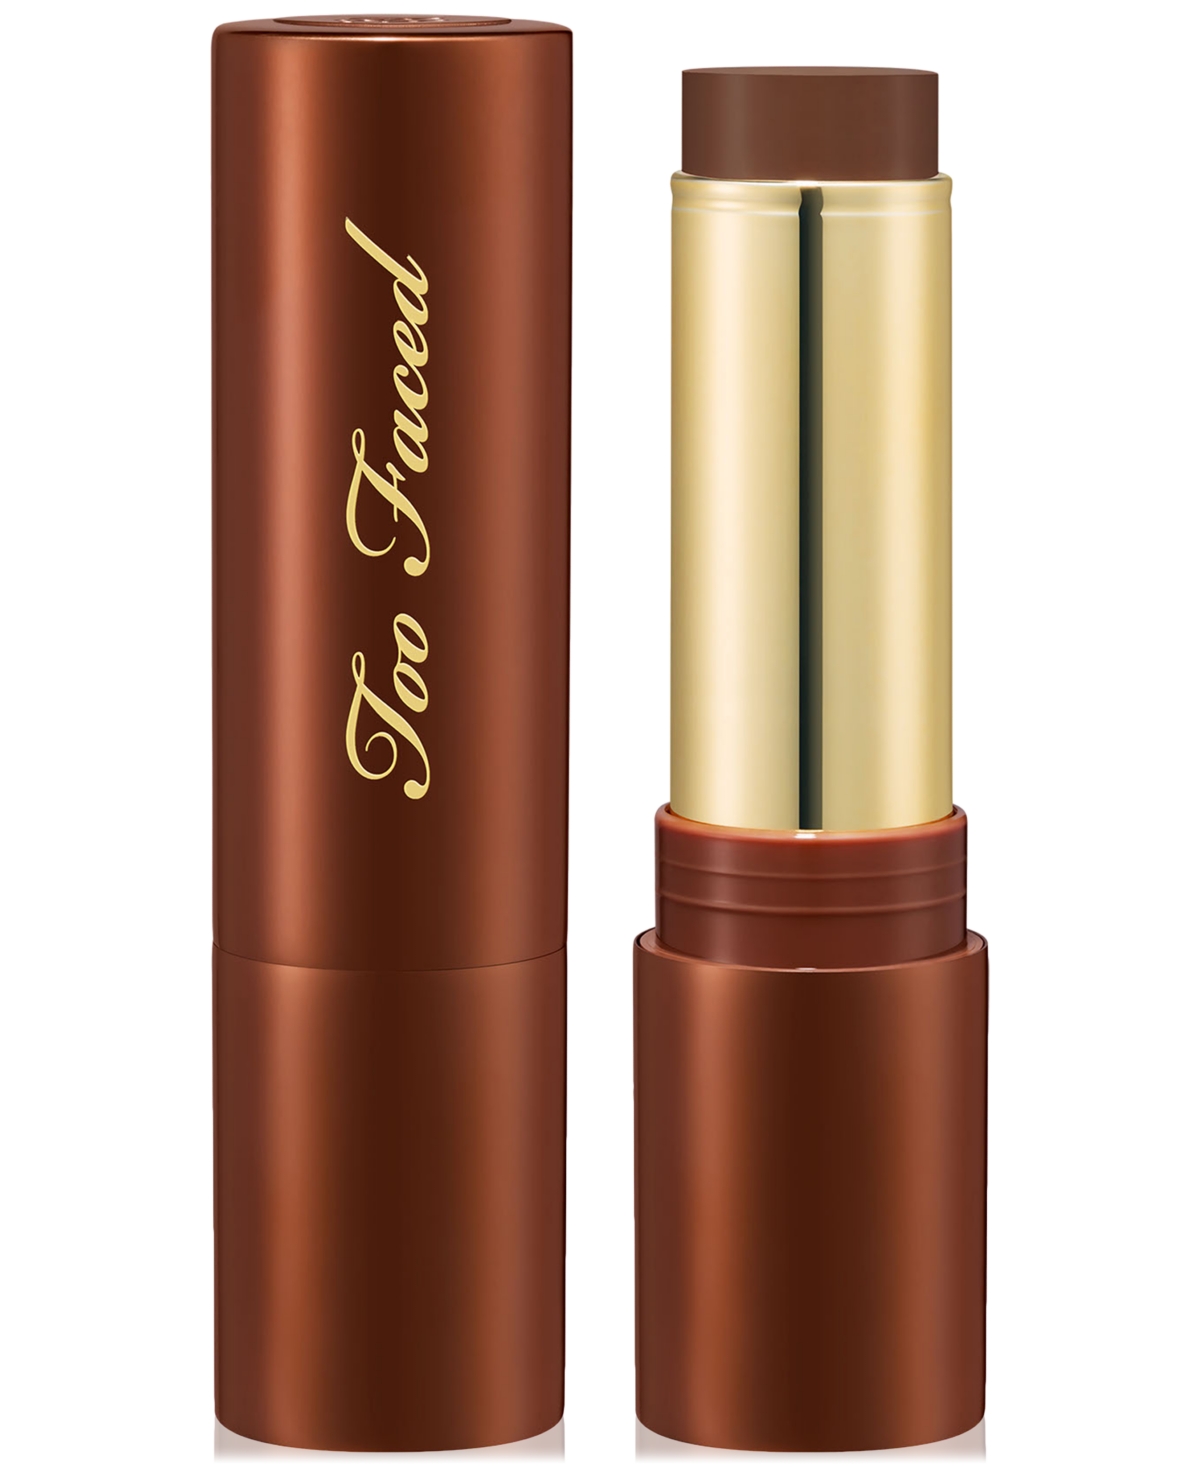 Too Faced Chocolate Soleil Melting Bronzing & Sculpting Stick In Chocolate Lava